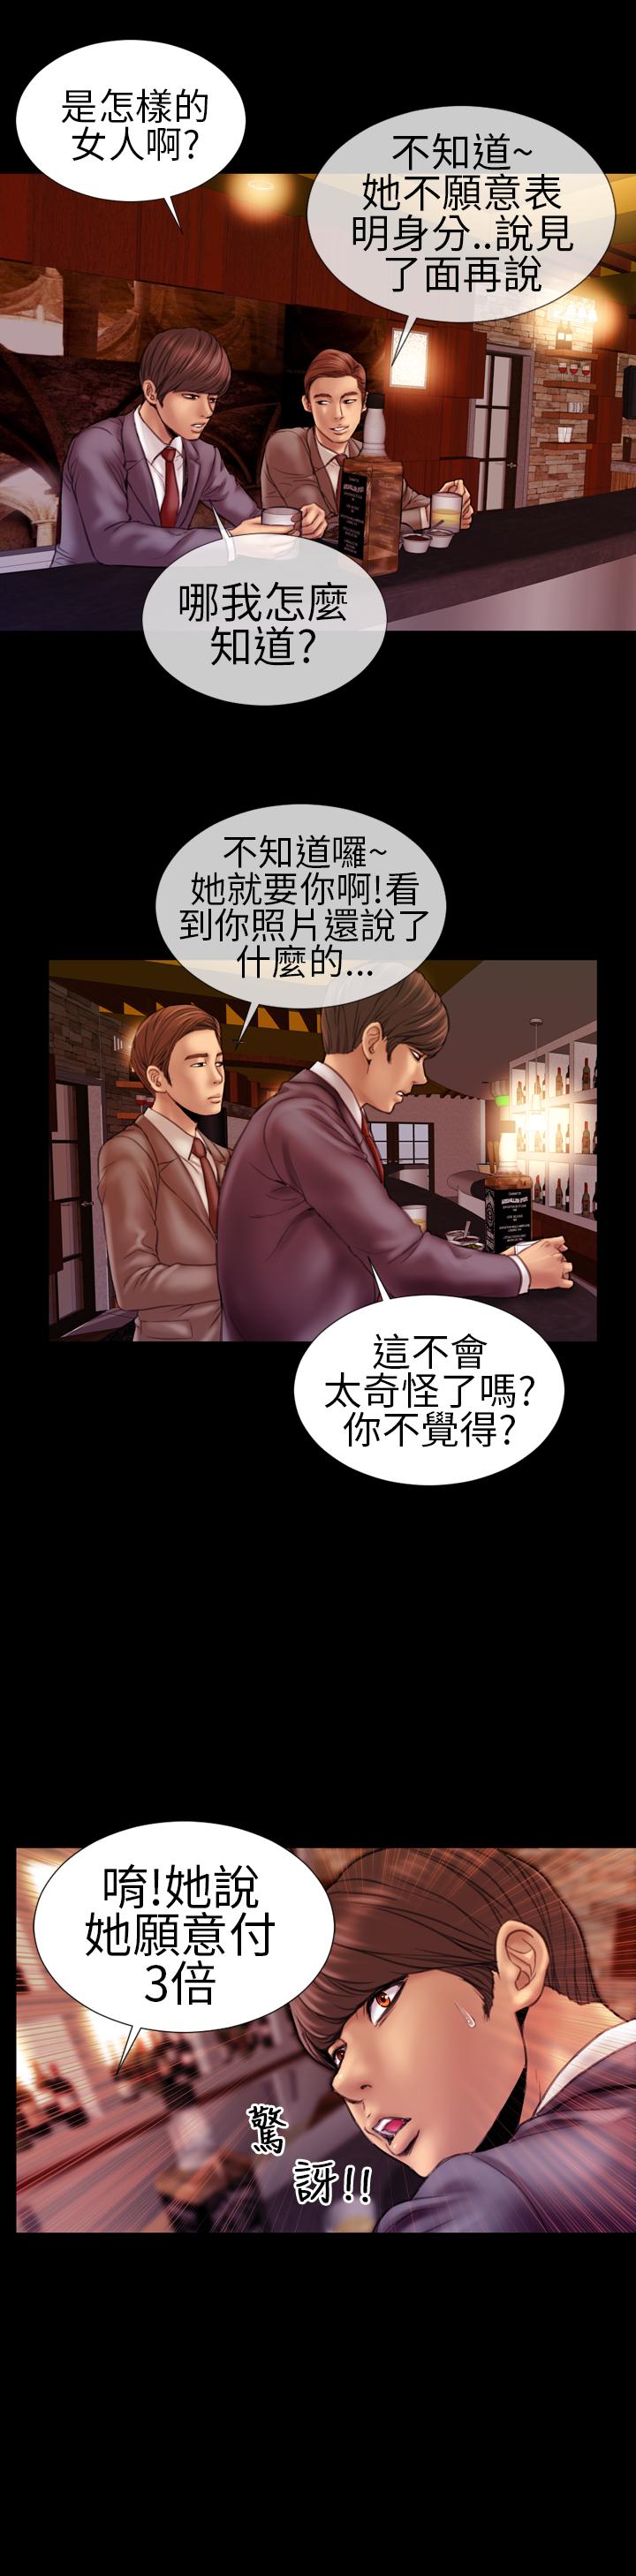 MY WIVES (淫蕩的妻子們) Ch.3 (Chinese) 3